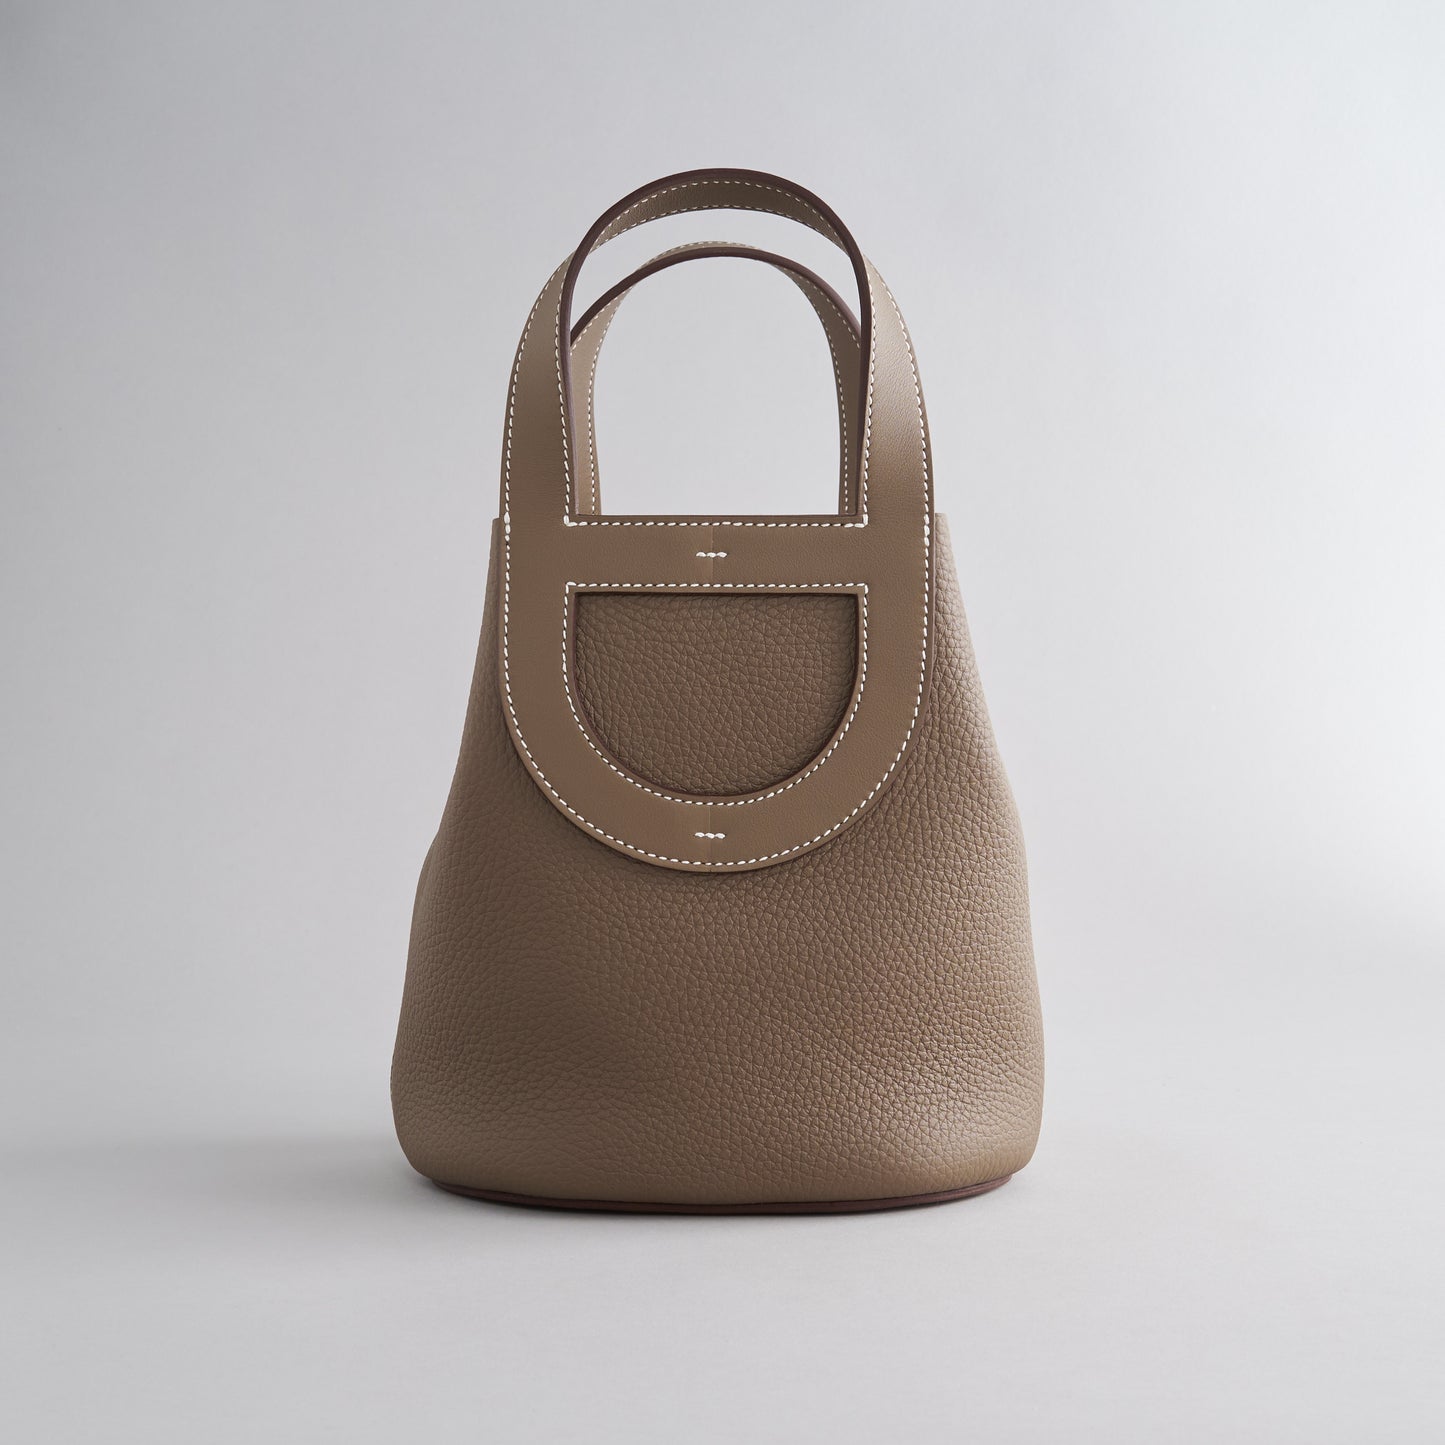 Hermès In-The-Loop Bag 18 Clemence, Swift Etoupe Gold Hardware